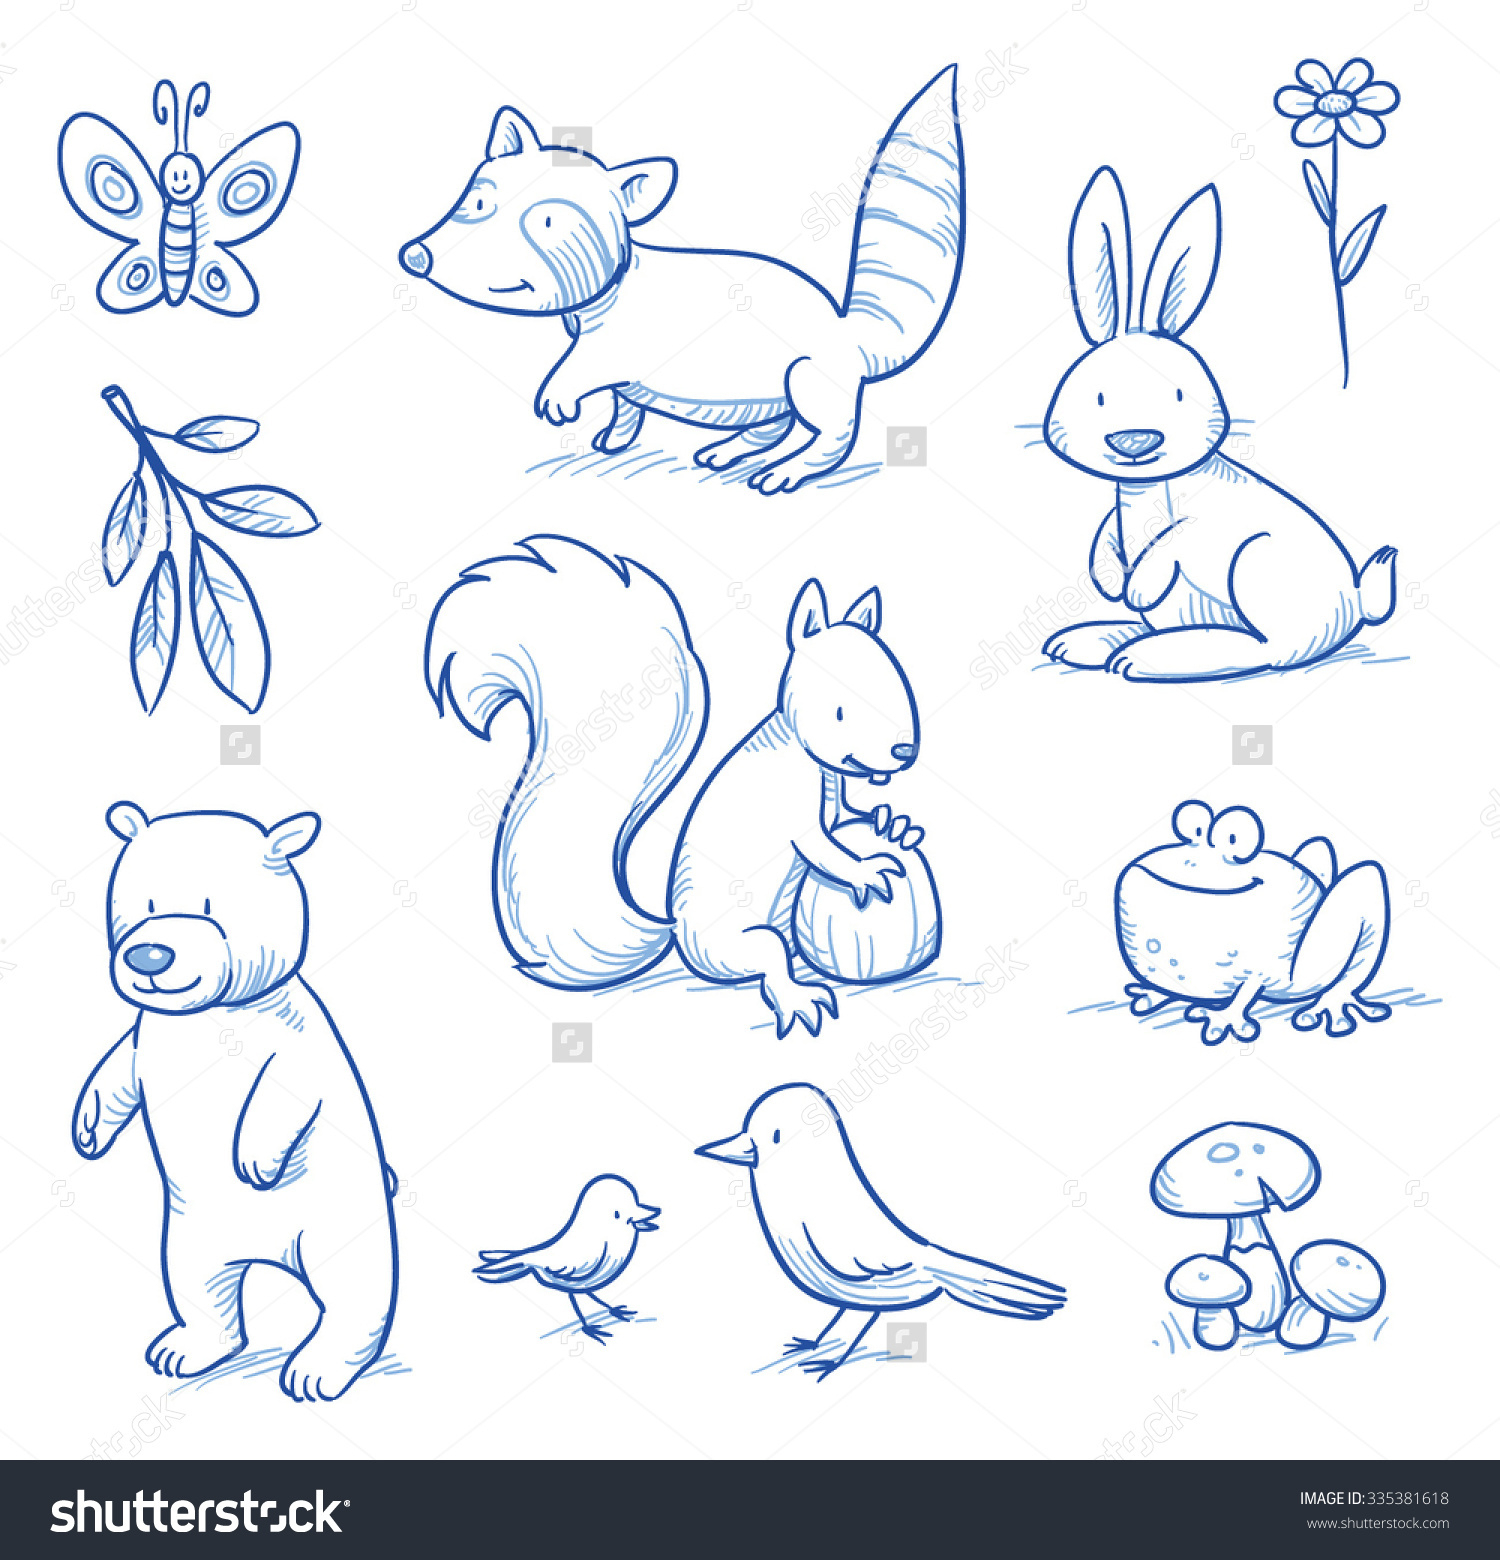 Forest Animals Drawing Kids The 25+ best Woodland animals ideas on